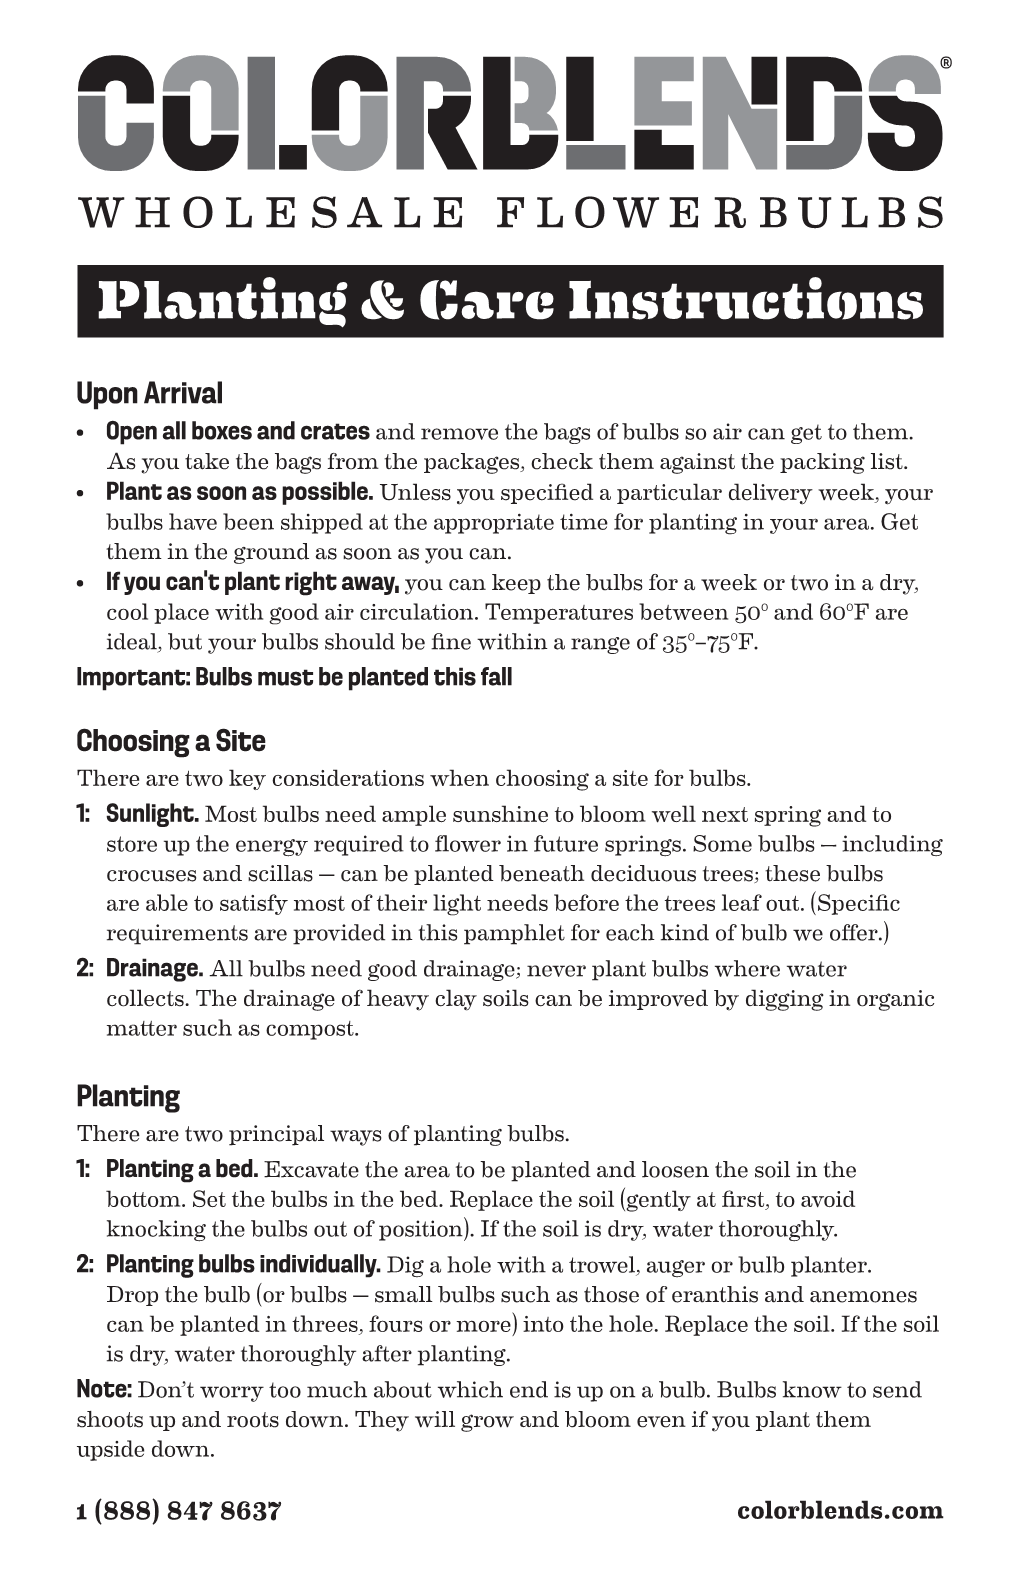 Planting & Care Instructions